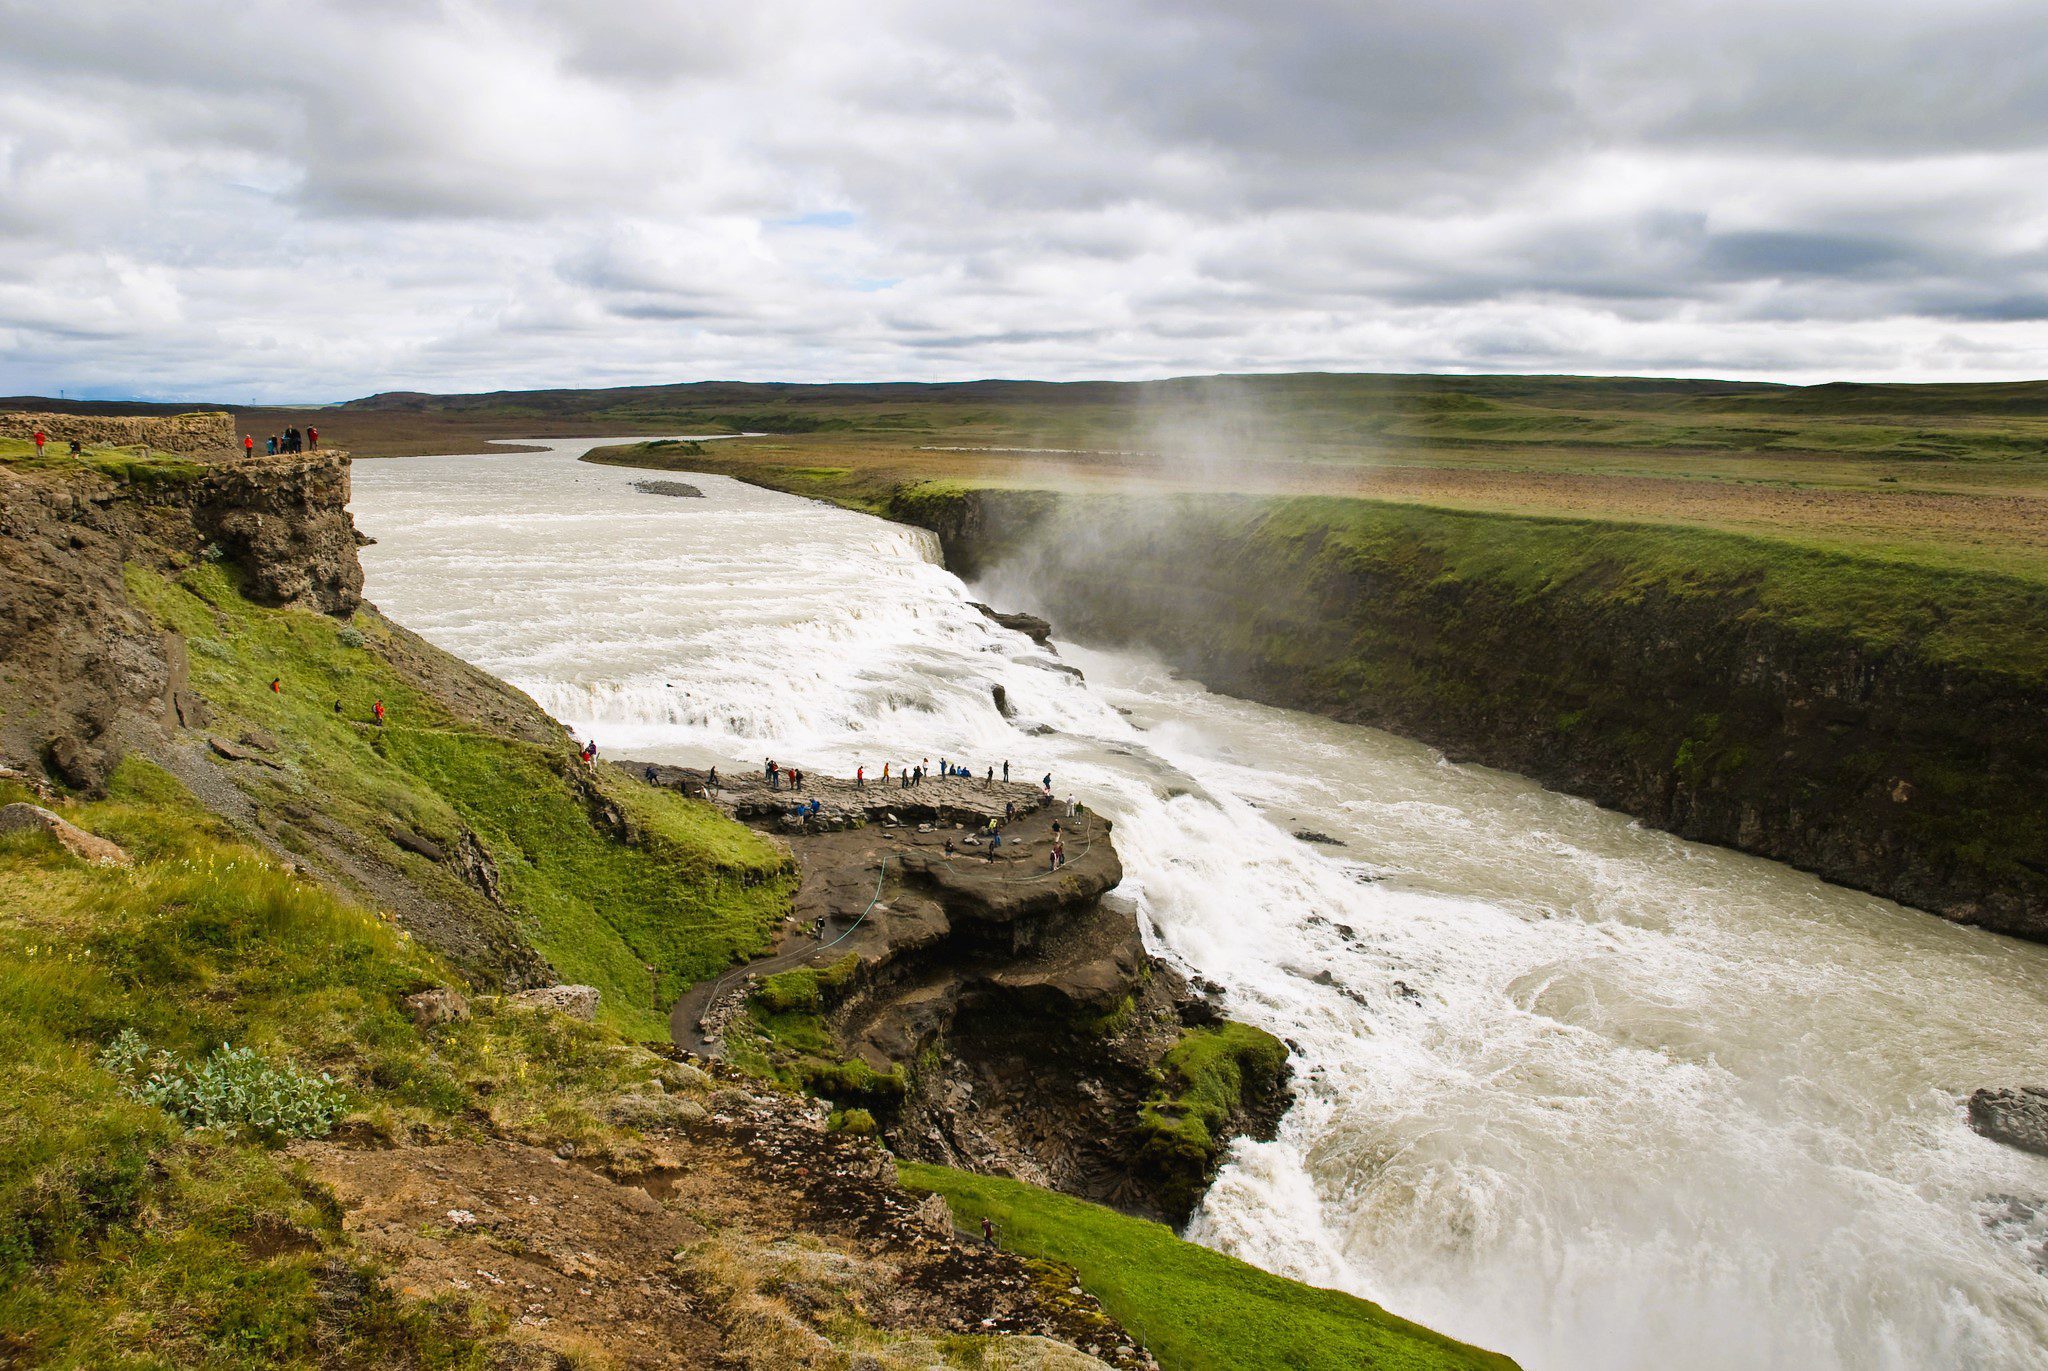 Gullfoss ("Golden Falls"), perhaps the most beautiful waterfall in Iceland.